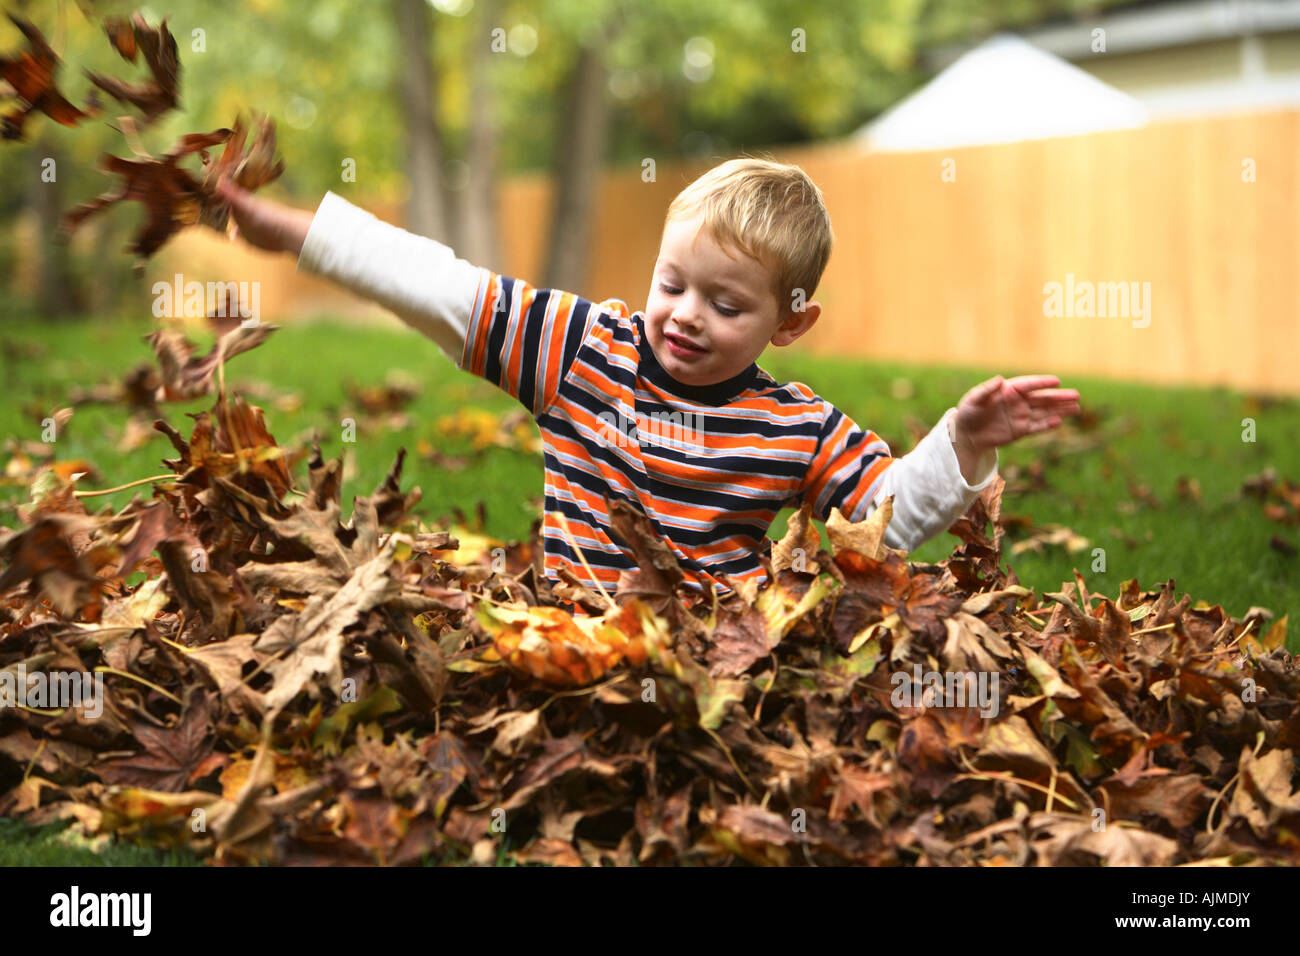 Three year old boy playing in pile of leaves Stock Photo